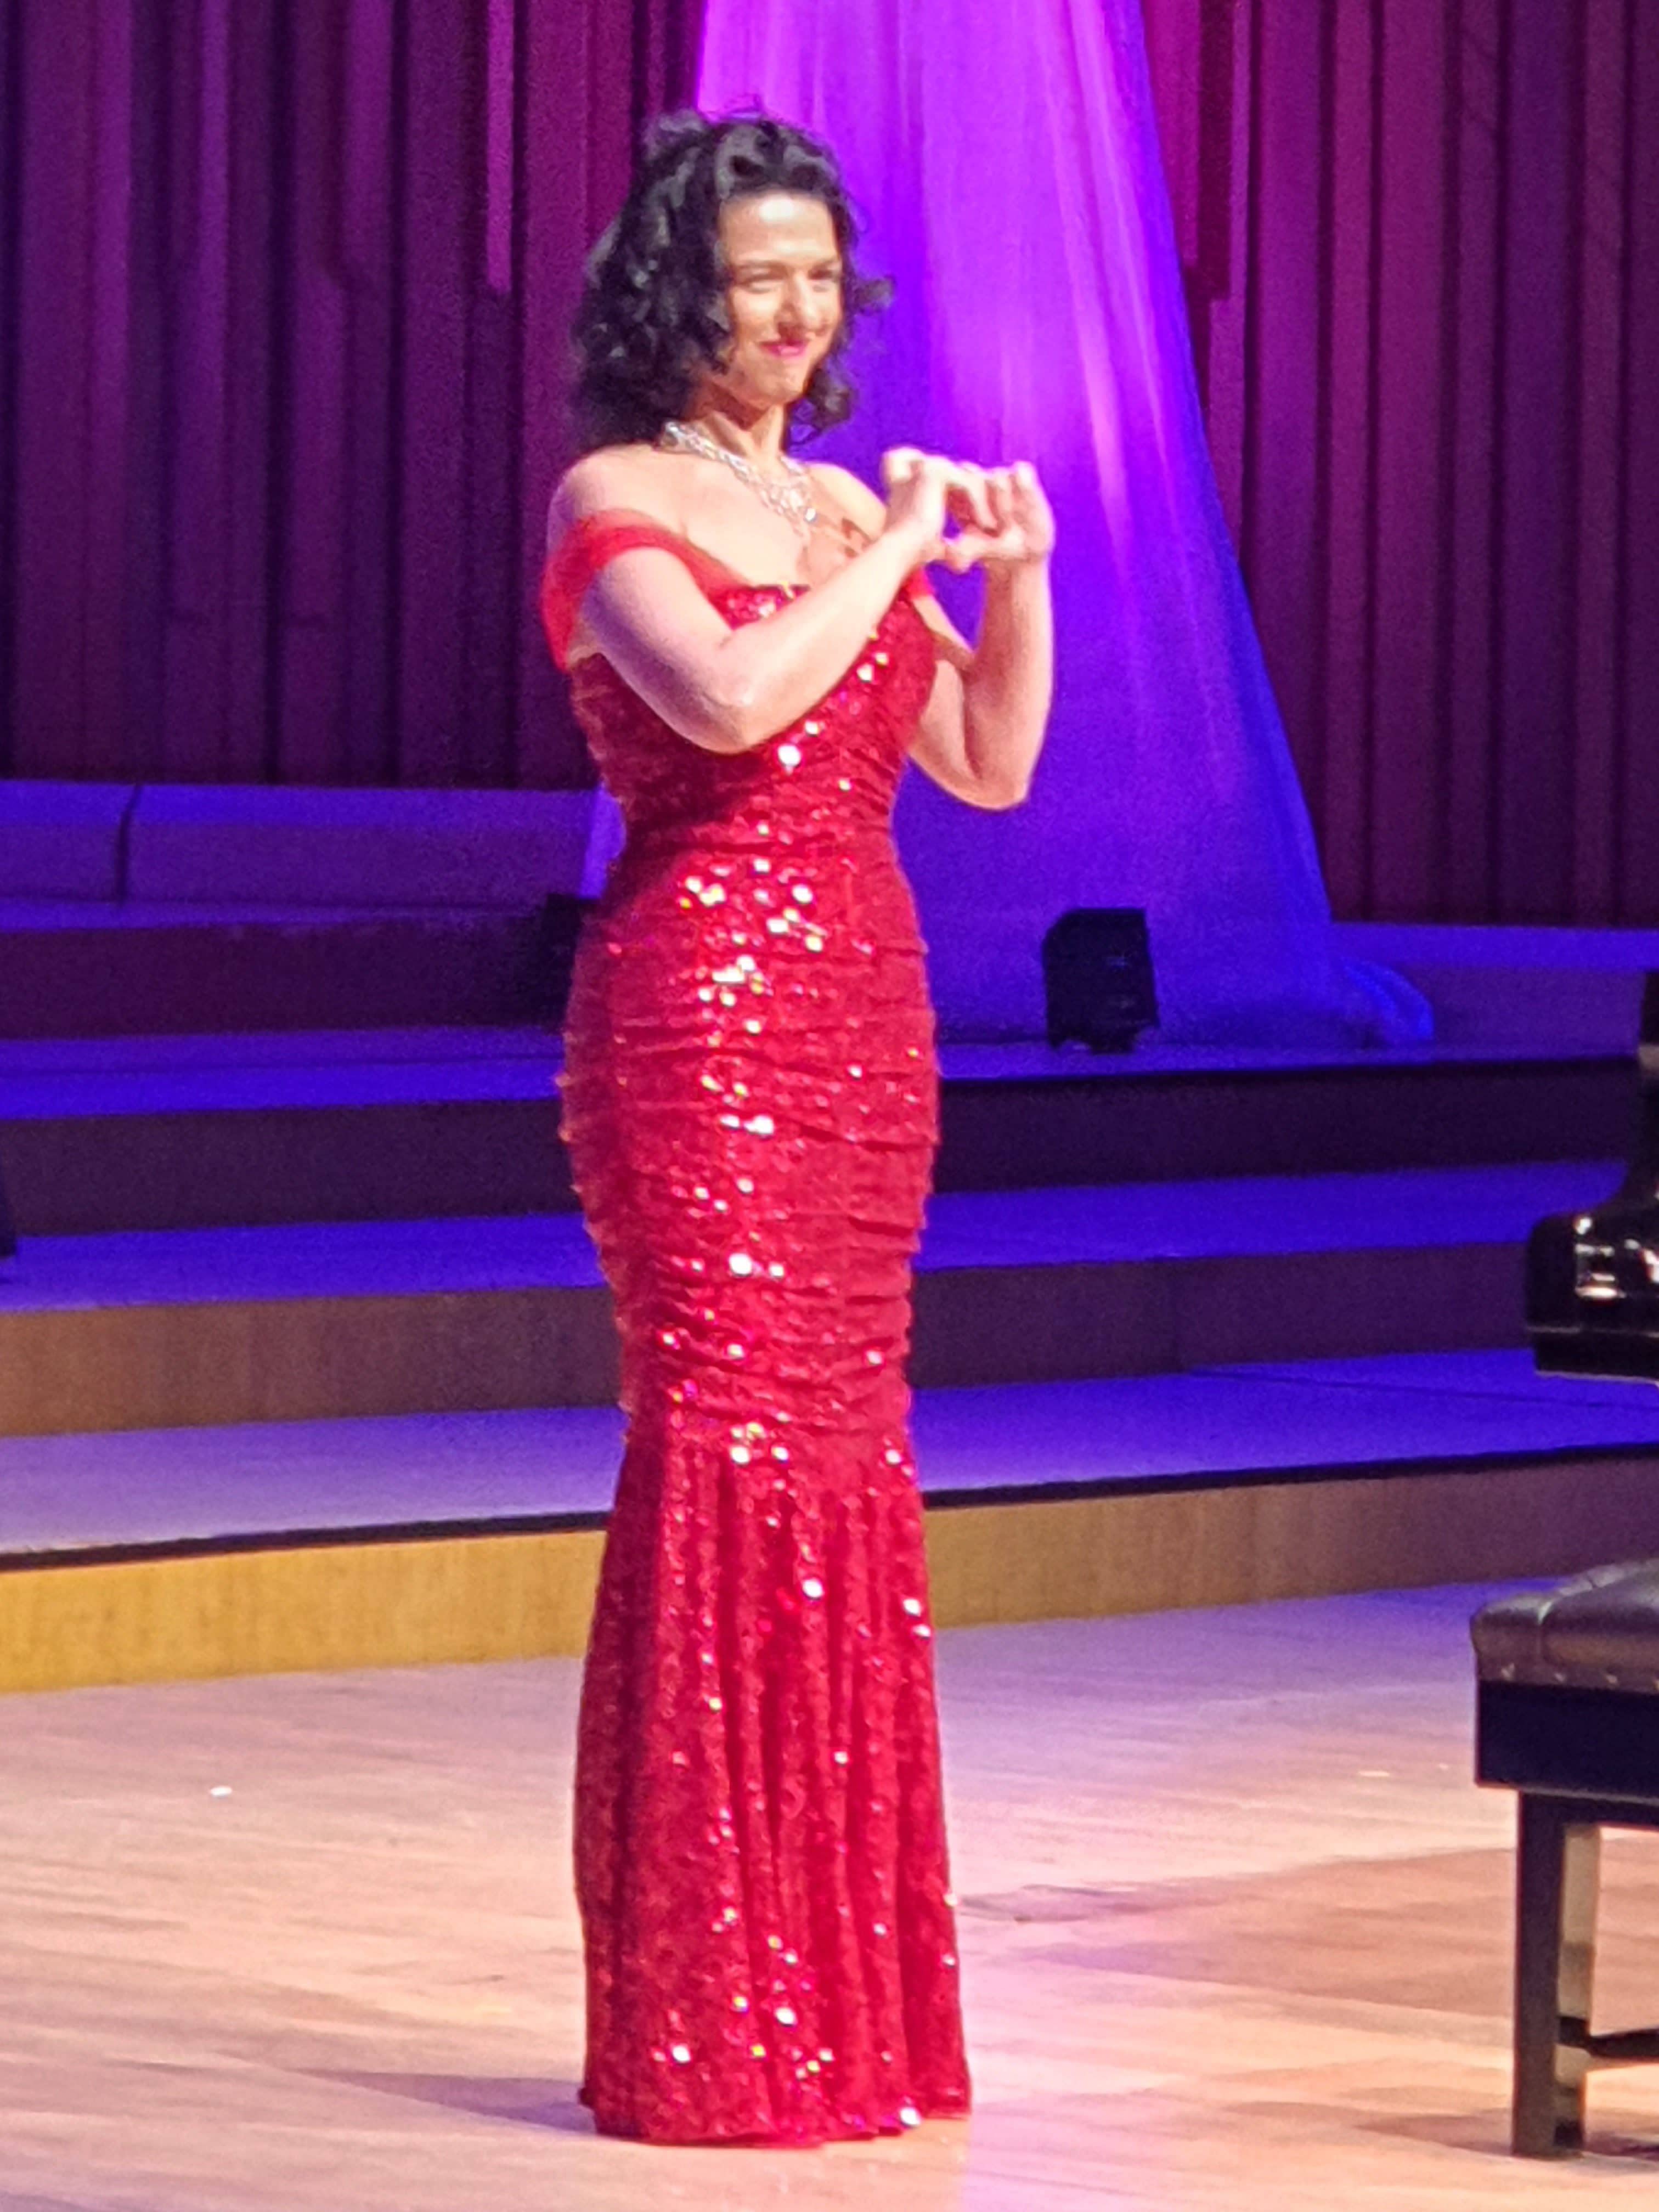 Khatia’s love story gets heckled in London